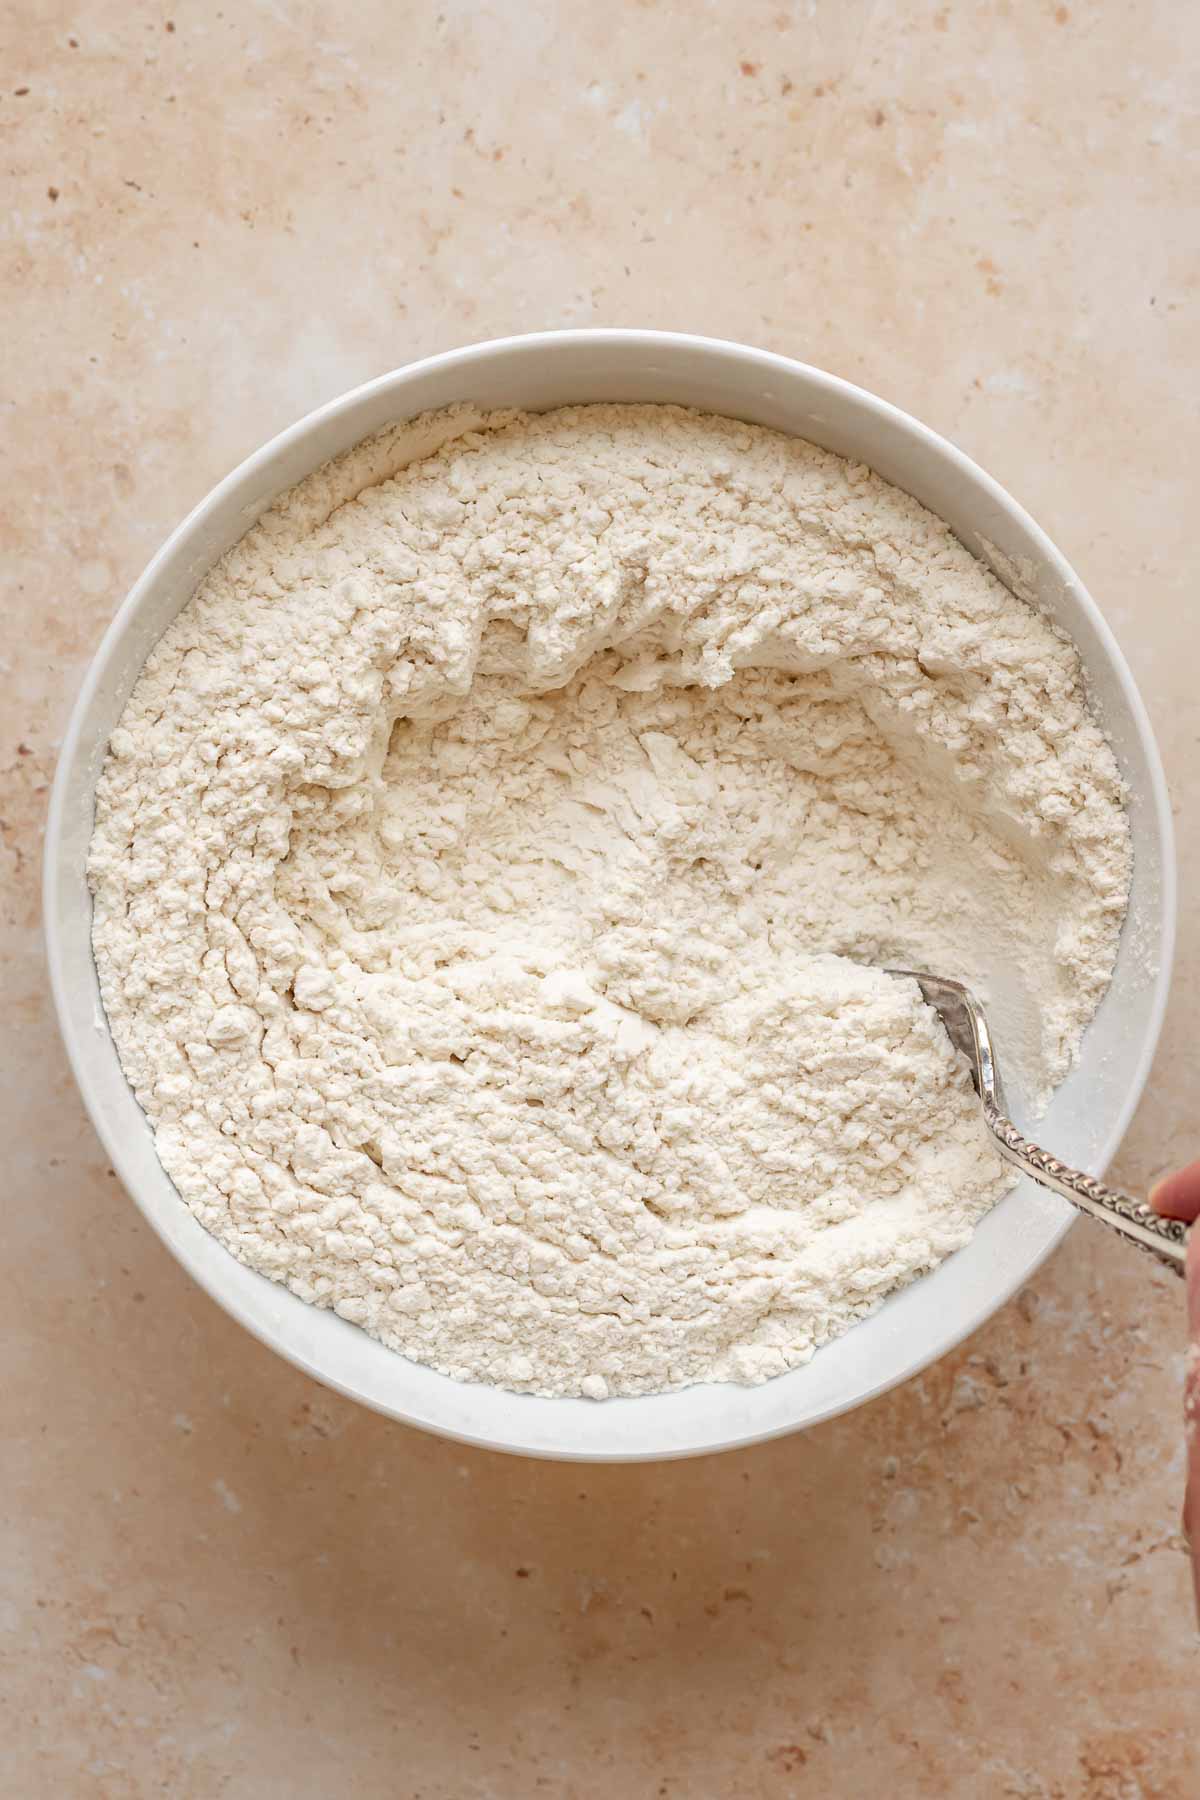 Flour and baking powder mixed in a bowl.